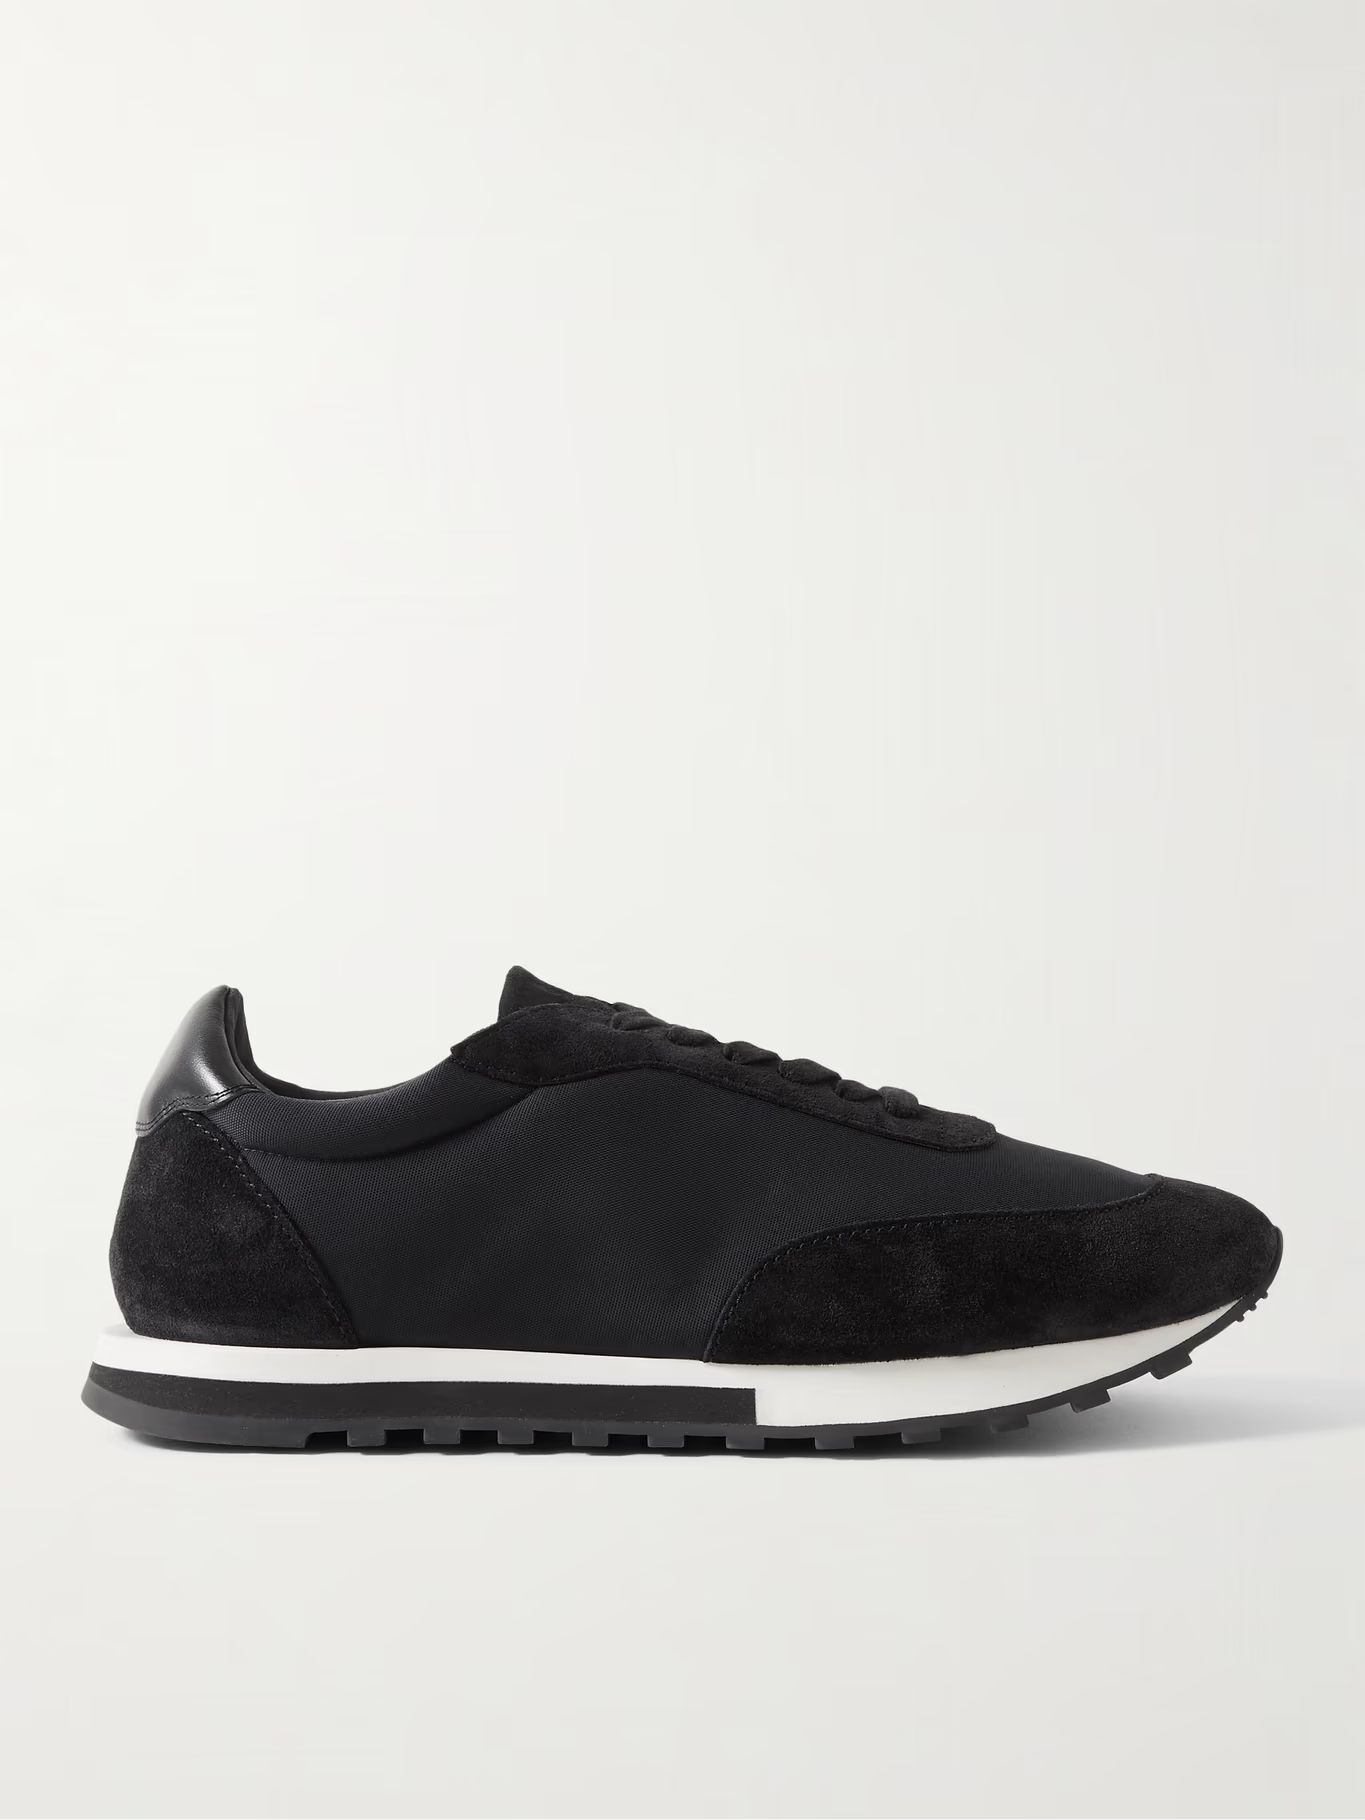 Owen Leather- and Suede-Trimmed Nylon Sneakers | Mr Porter (US & CA)